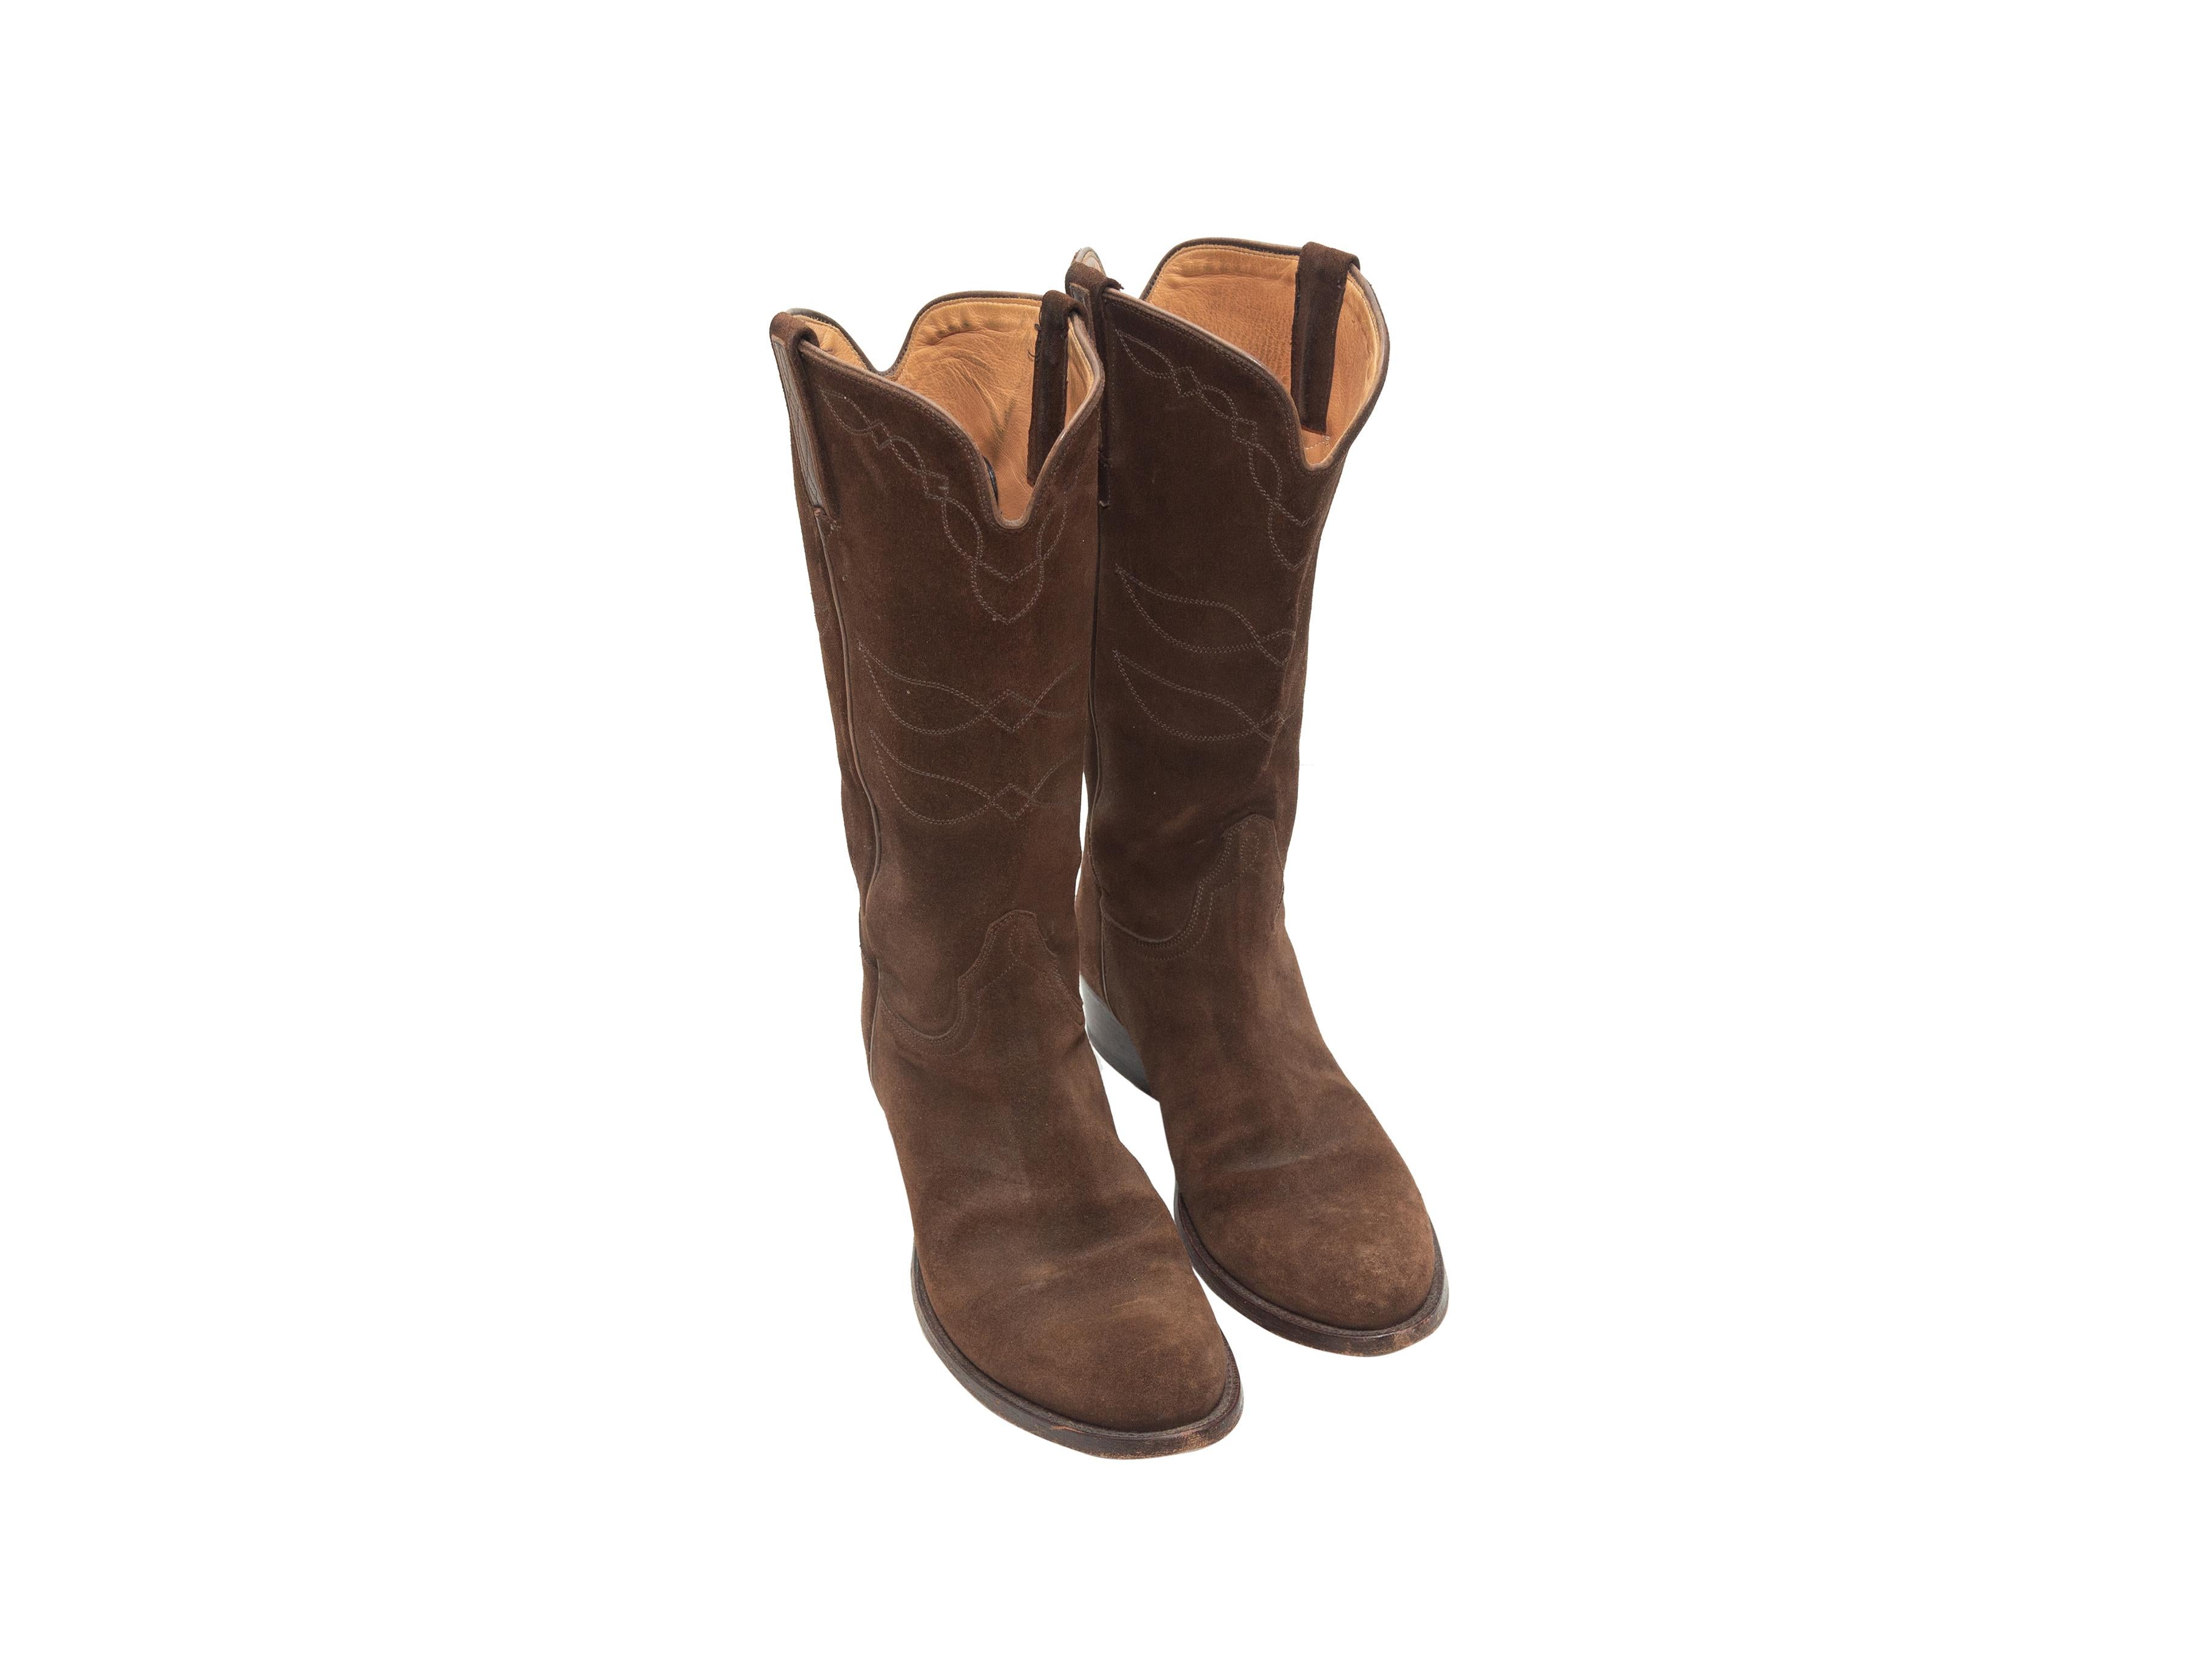 Product details: Brown suede cowboy boots by Ralph Lauren. Pull-on style. Embroidery throughout. Stacked heels. 1.5